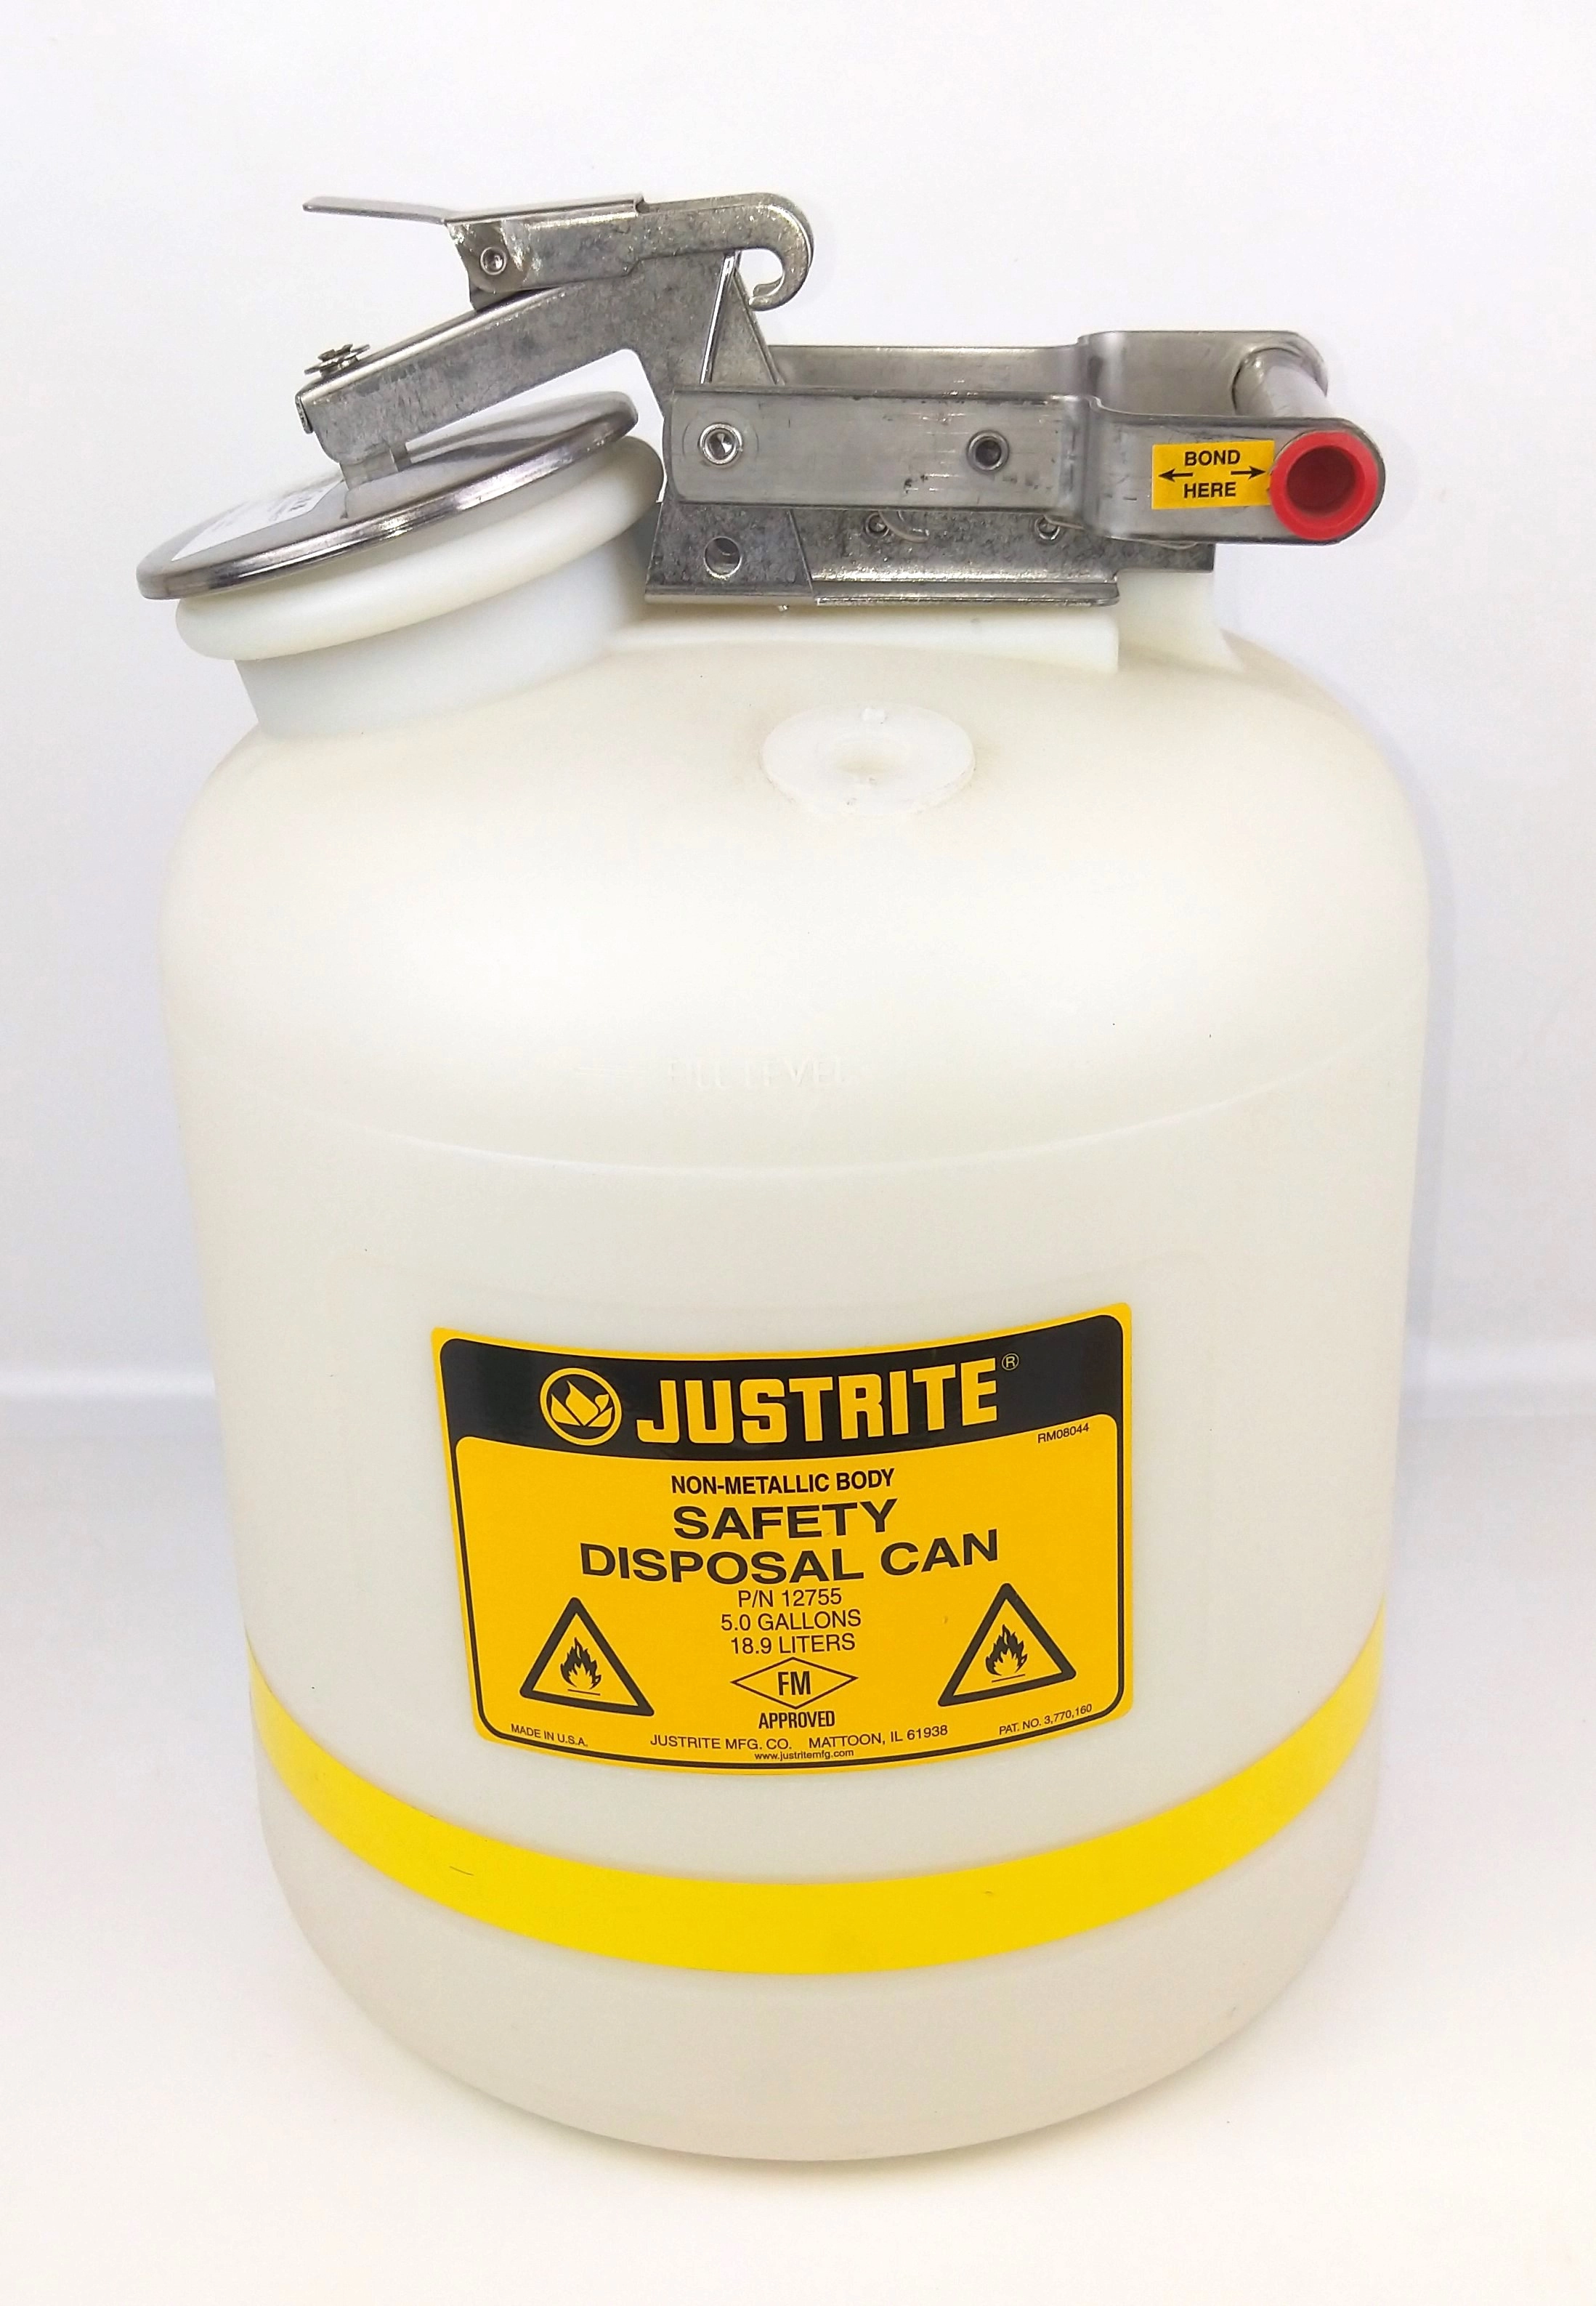 Justrite 12755 Safety Disposal Can - 19L (5 Gallon)